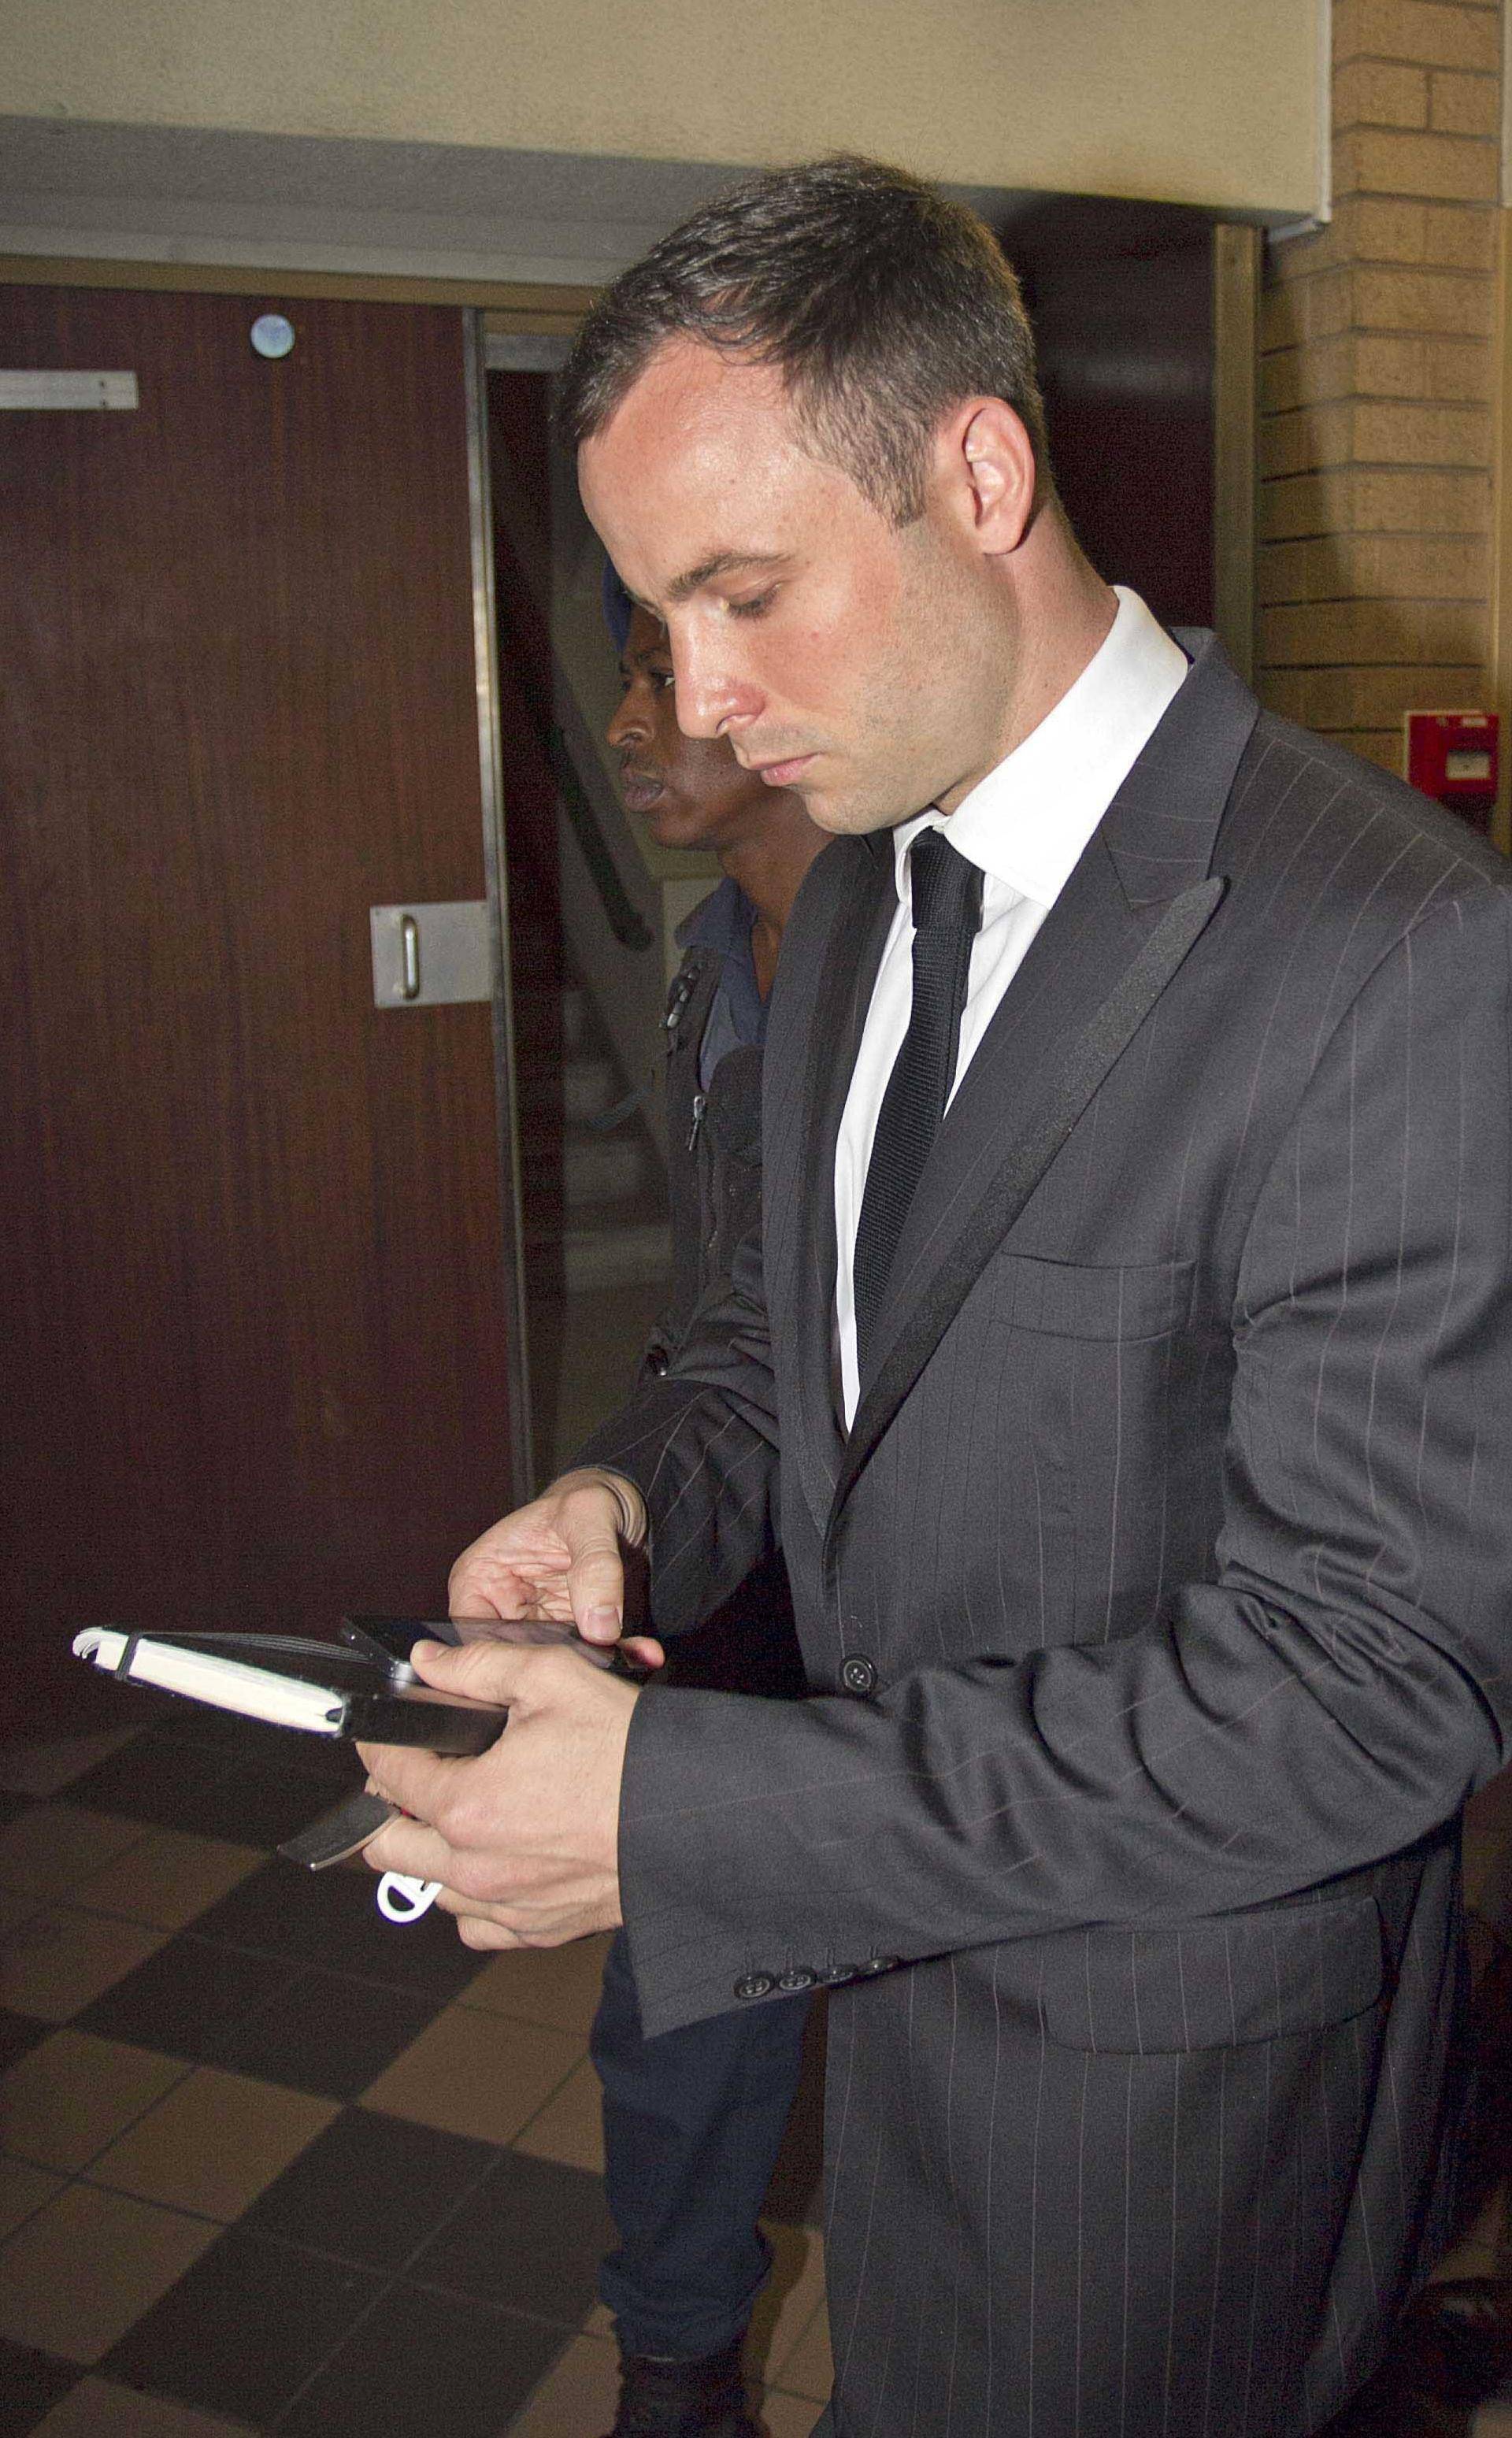 Oscar Pistorius arriving for sentencing at the High Court